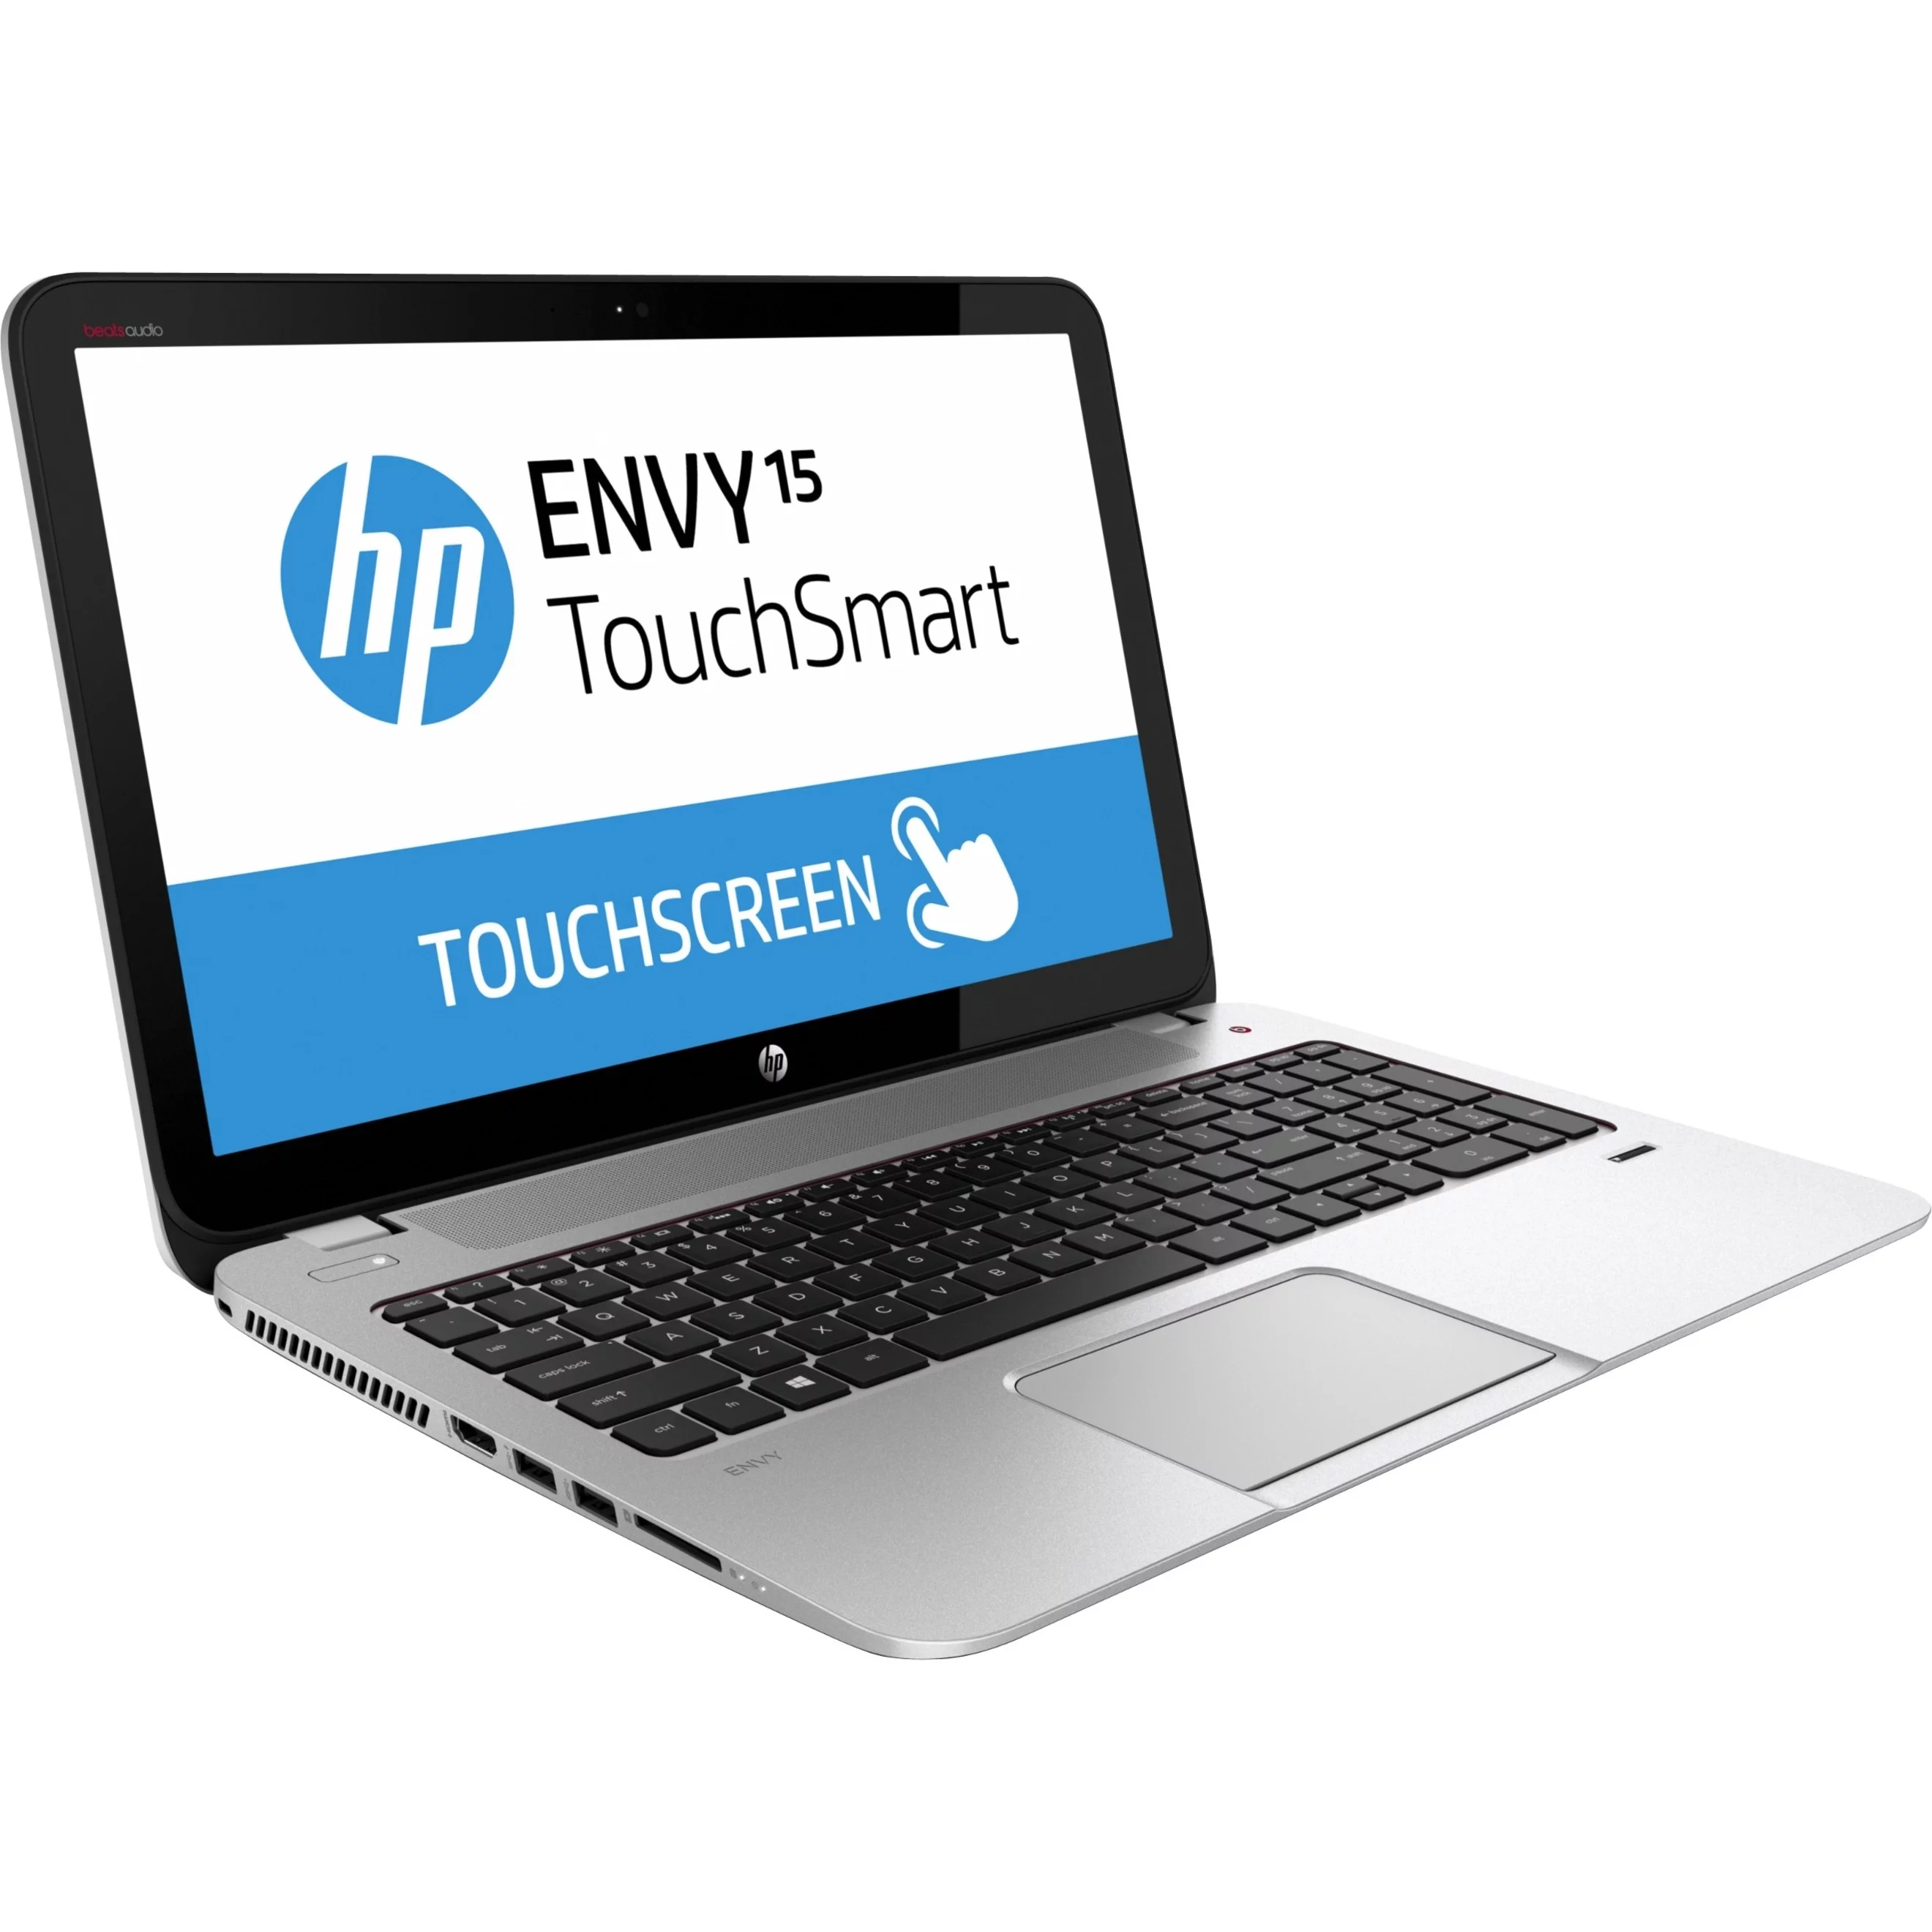 ENVY TouchSmart 15-j000 Select Edition Notebook PC series